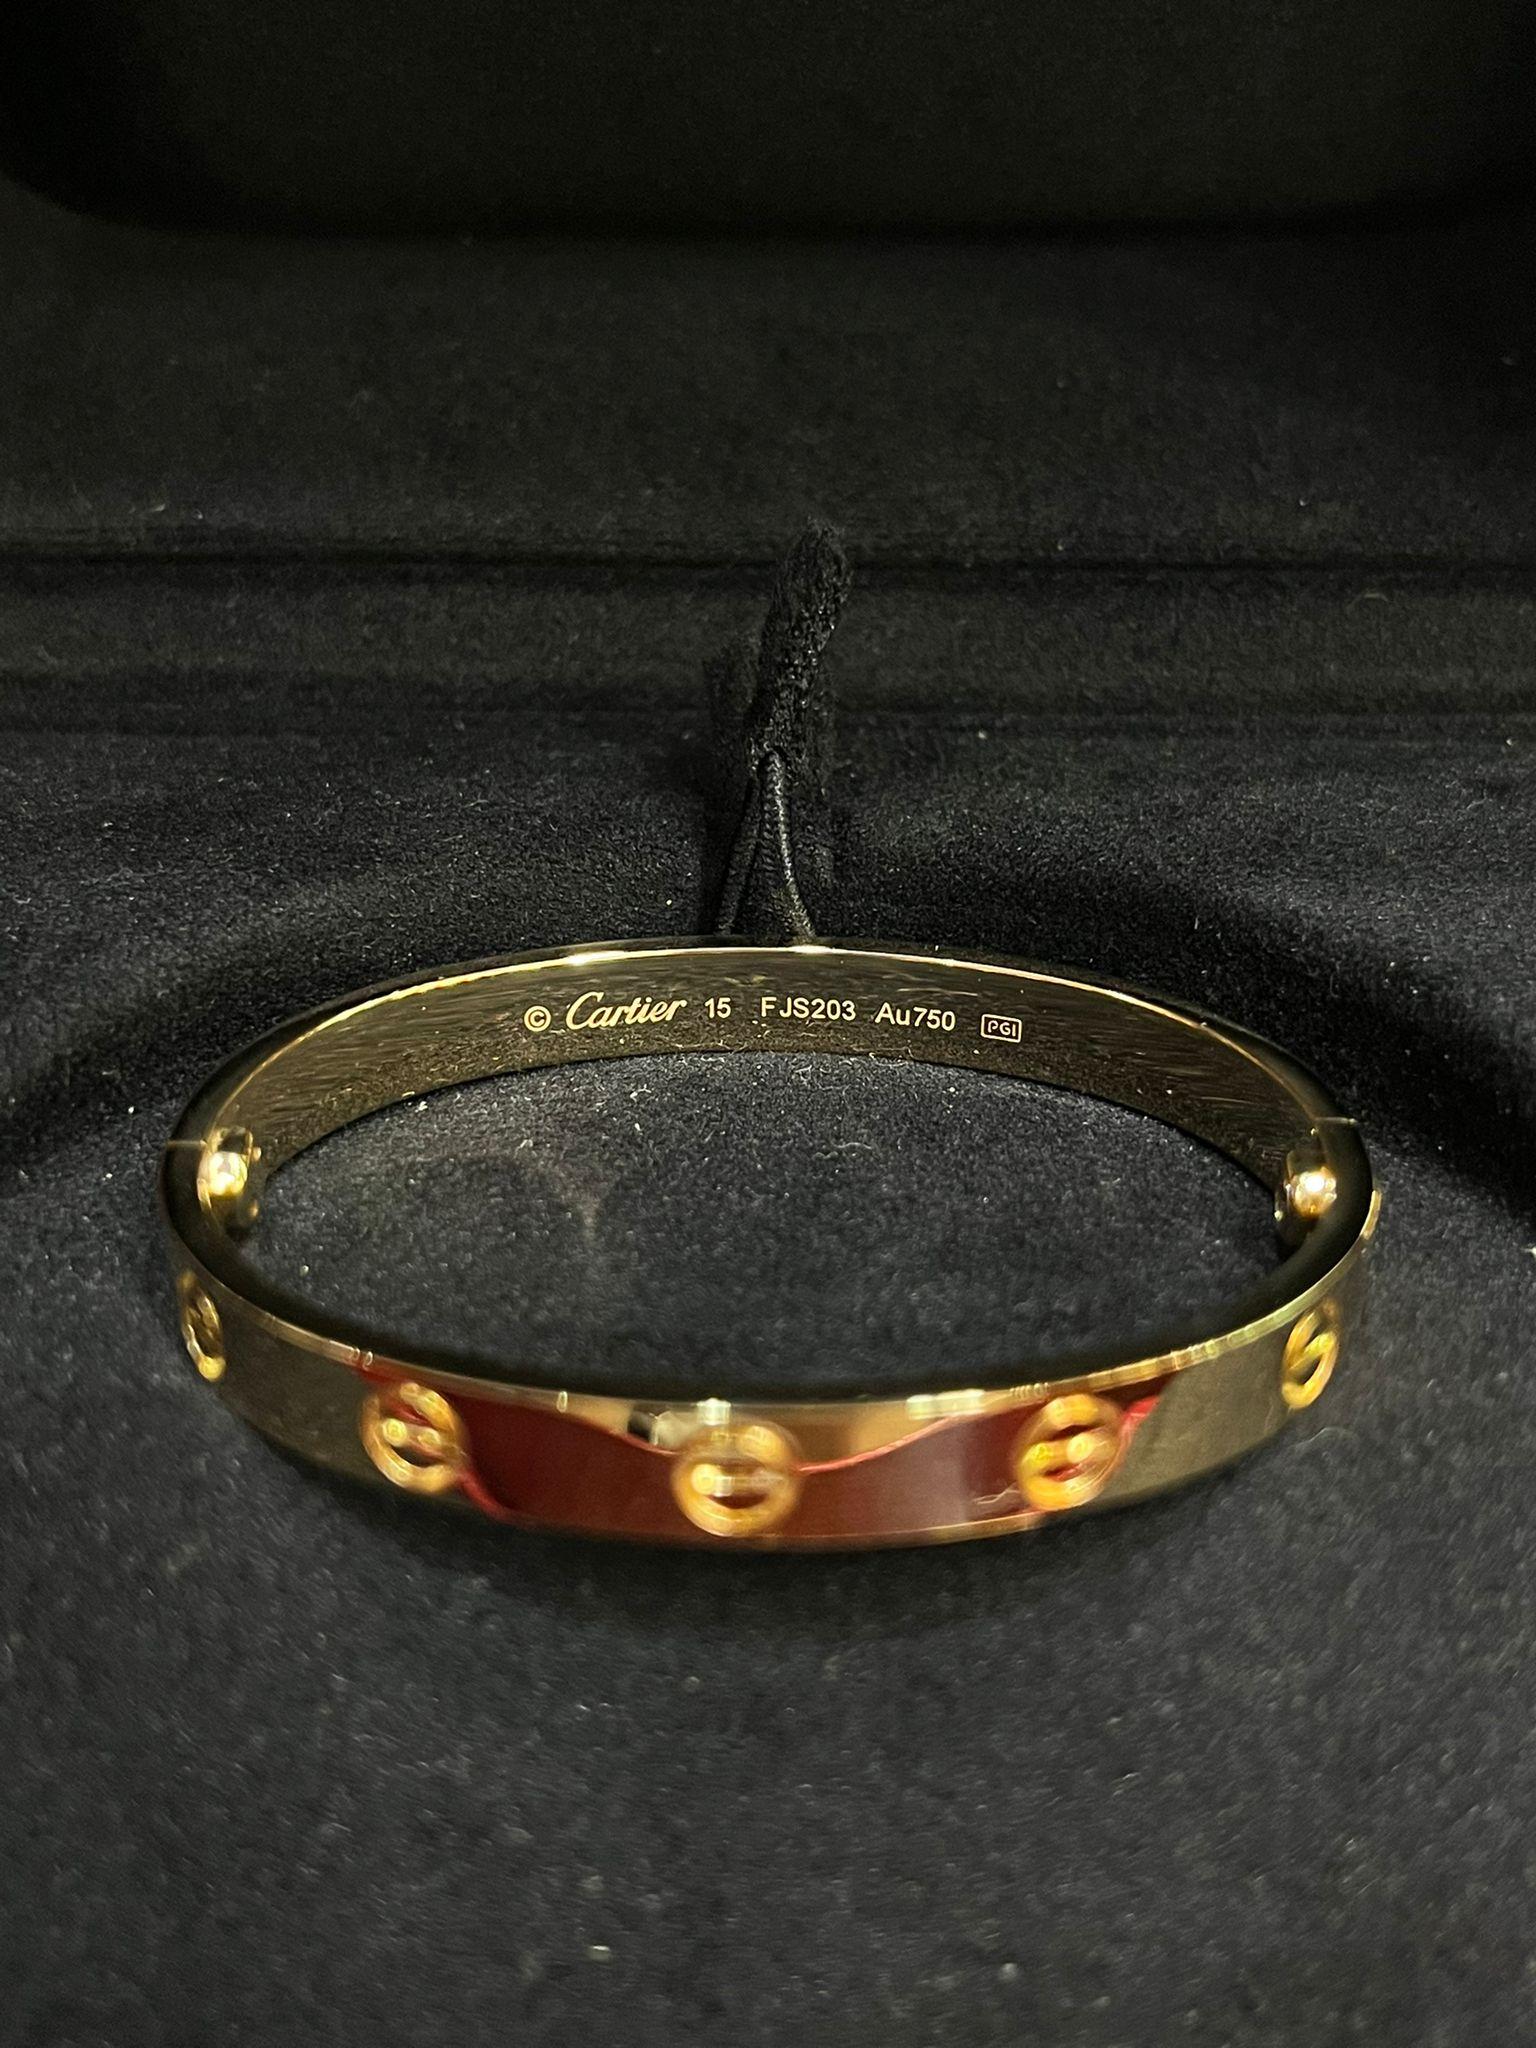 Cartier Love Bracelet 18K Yellow Gold Size 15 Brushed Finish with Screwdriver For Sale 6